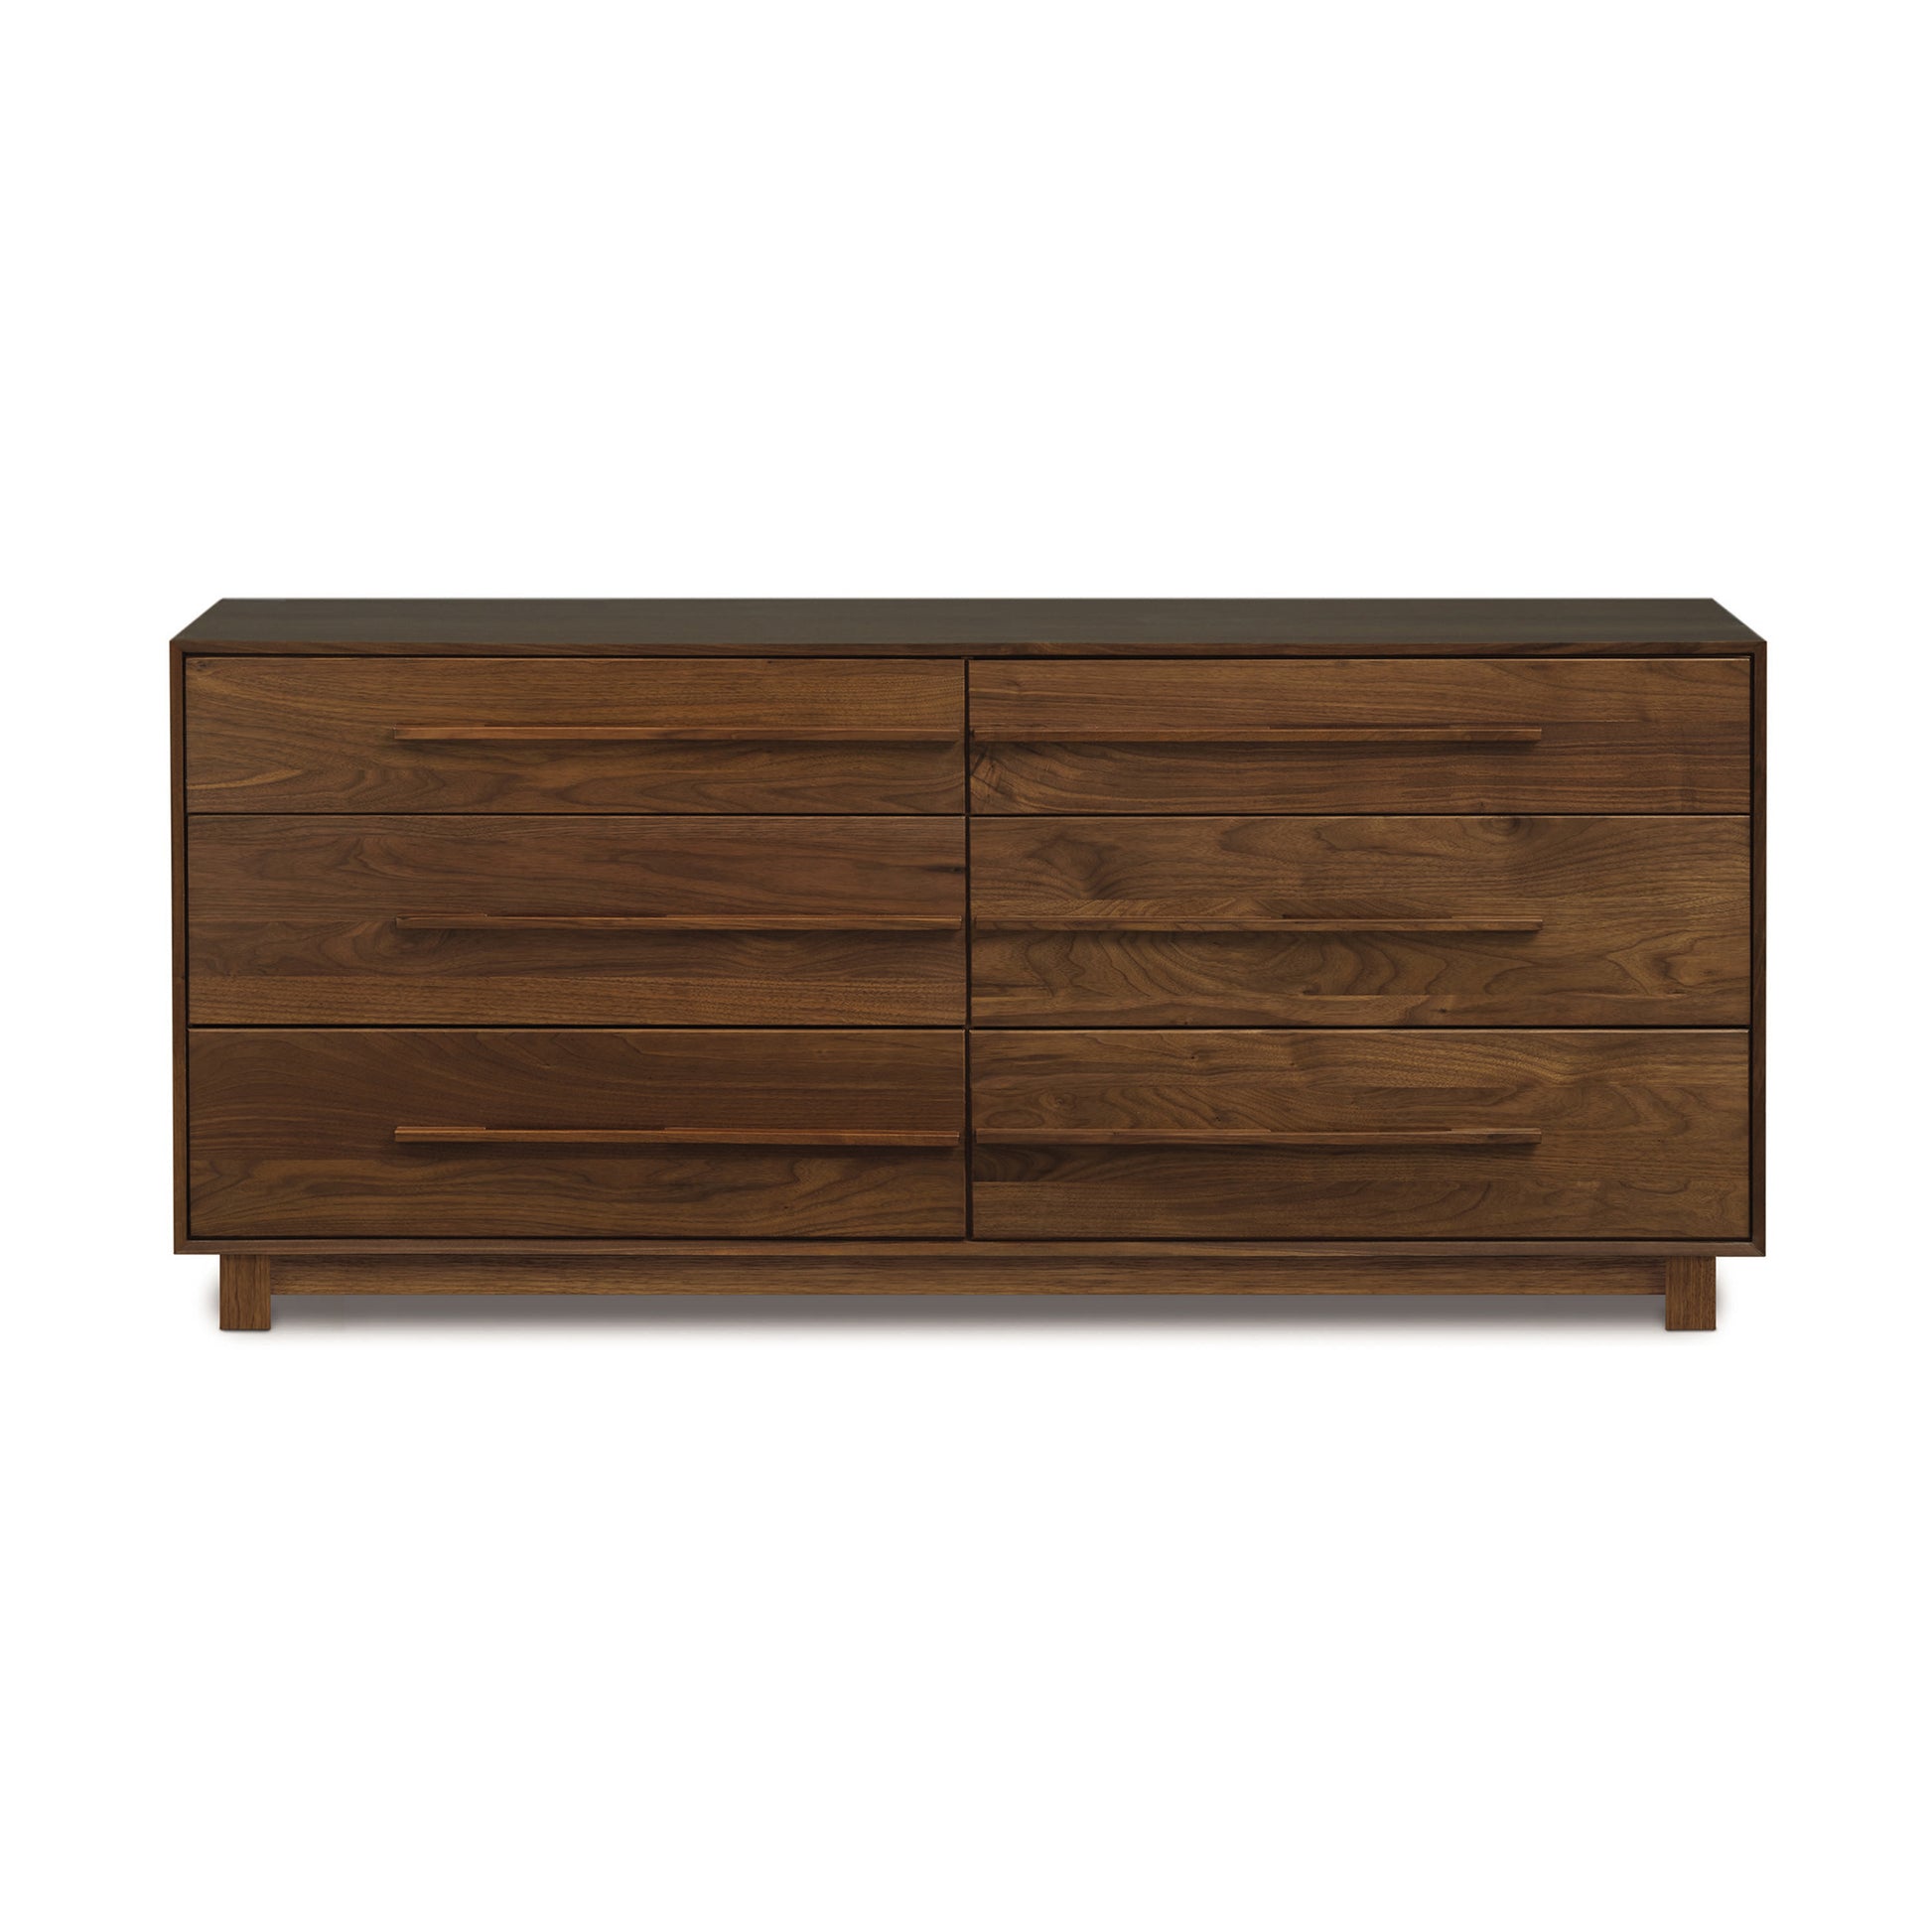 A modern bedroom furniture piece, the Copeland Furniture Sloane 6-Drawer Dresser features American hardwood construction with six drawers, isolated on a white background.